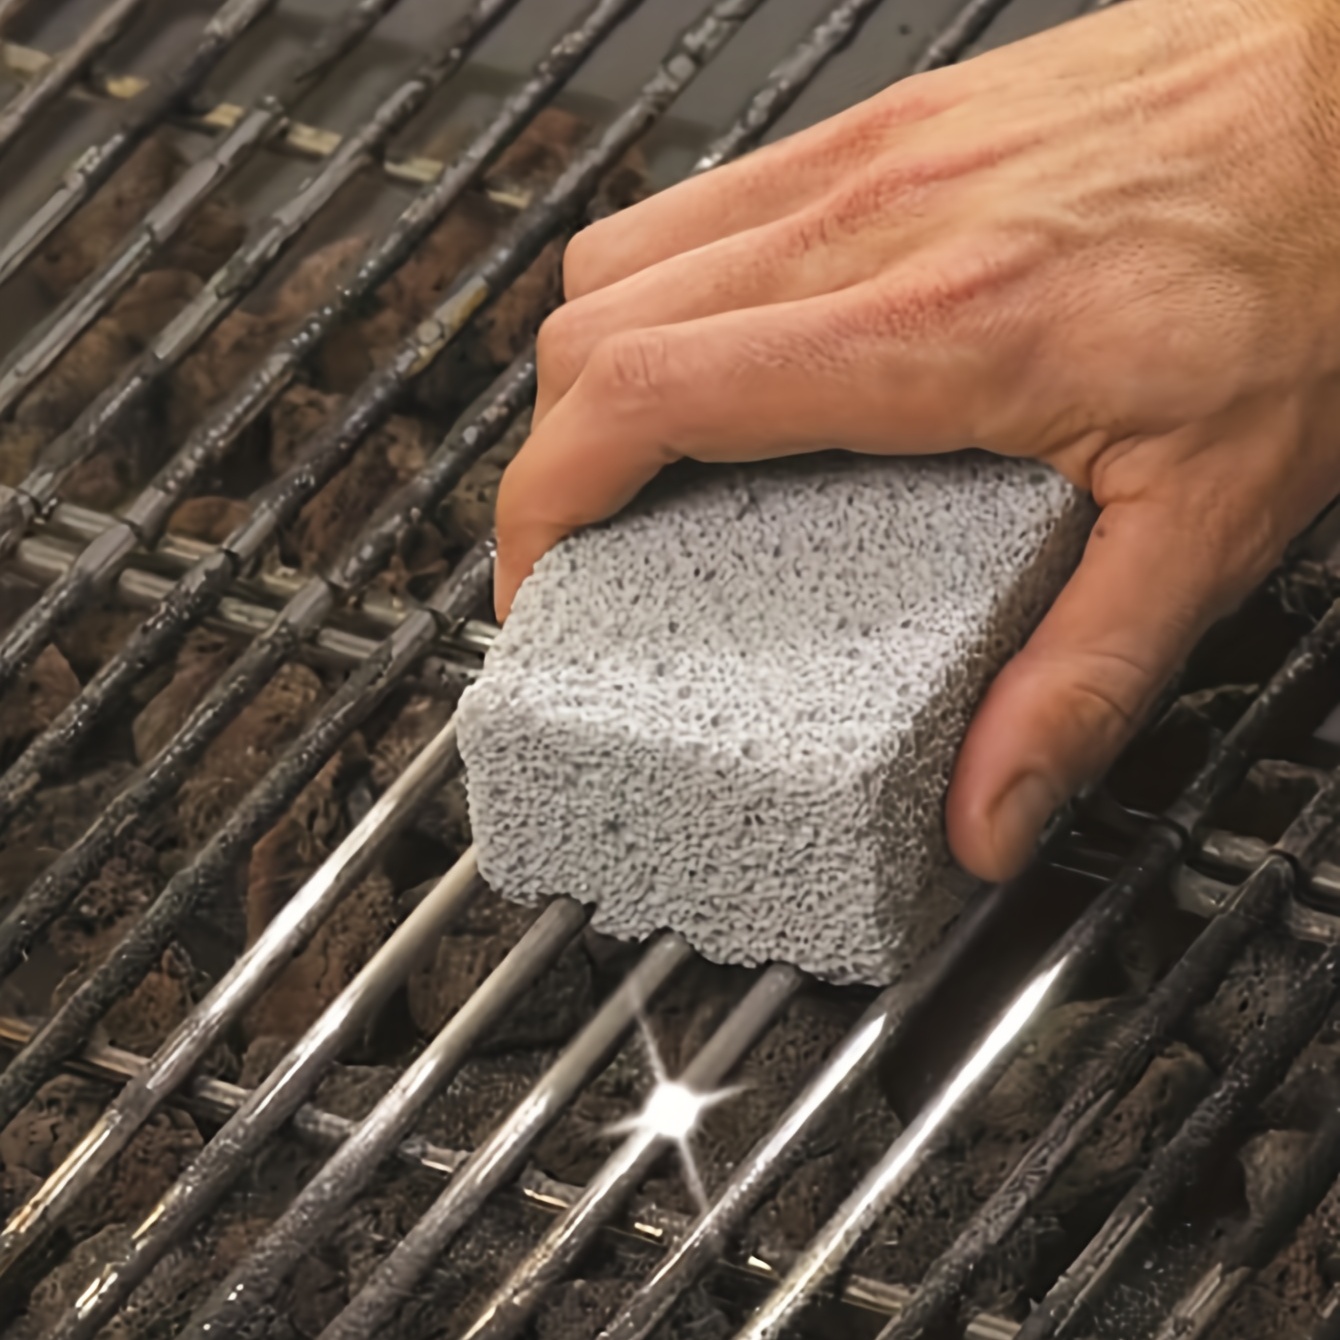 Grill Griddle Cleaning Brick Block, Ecological Grill Cleaning